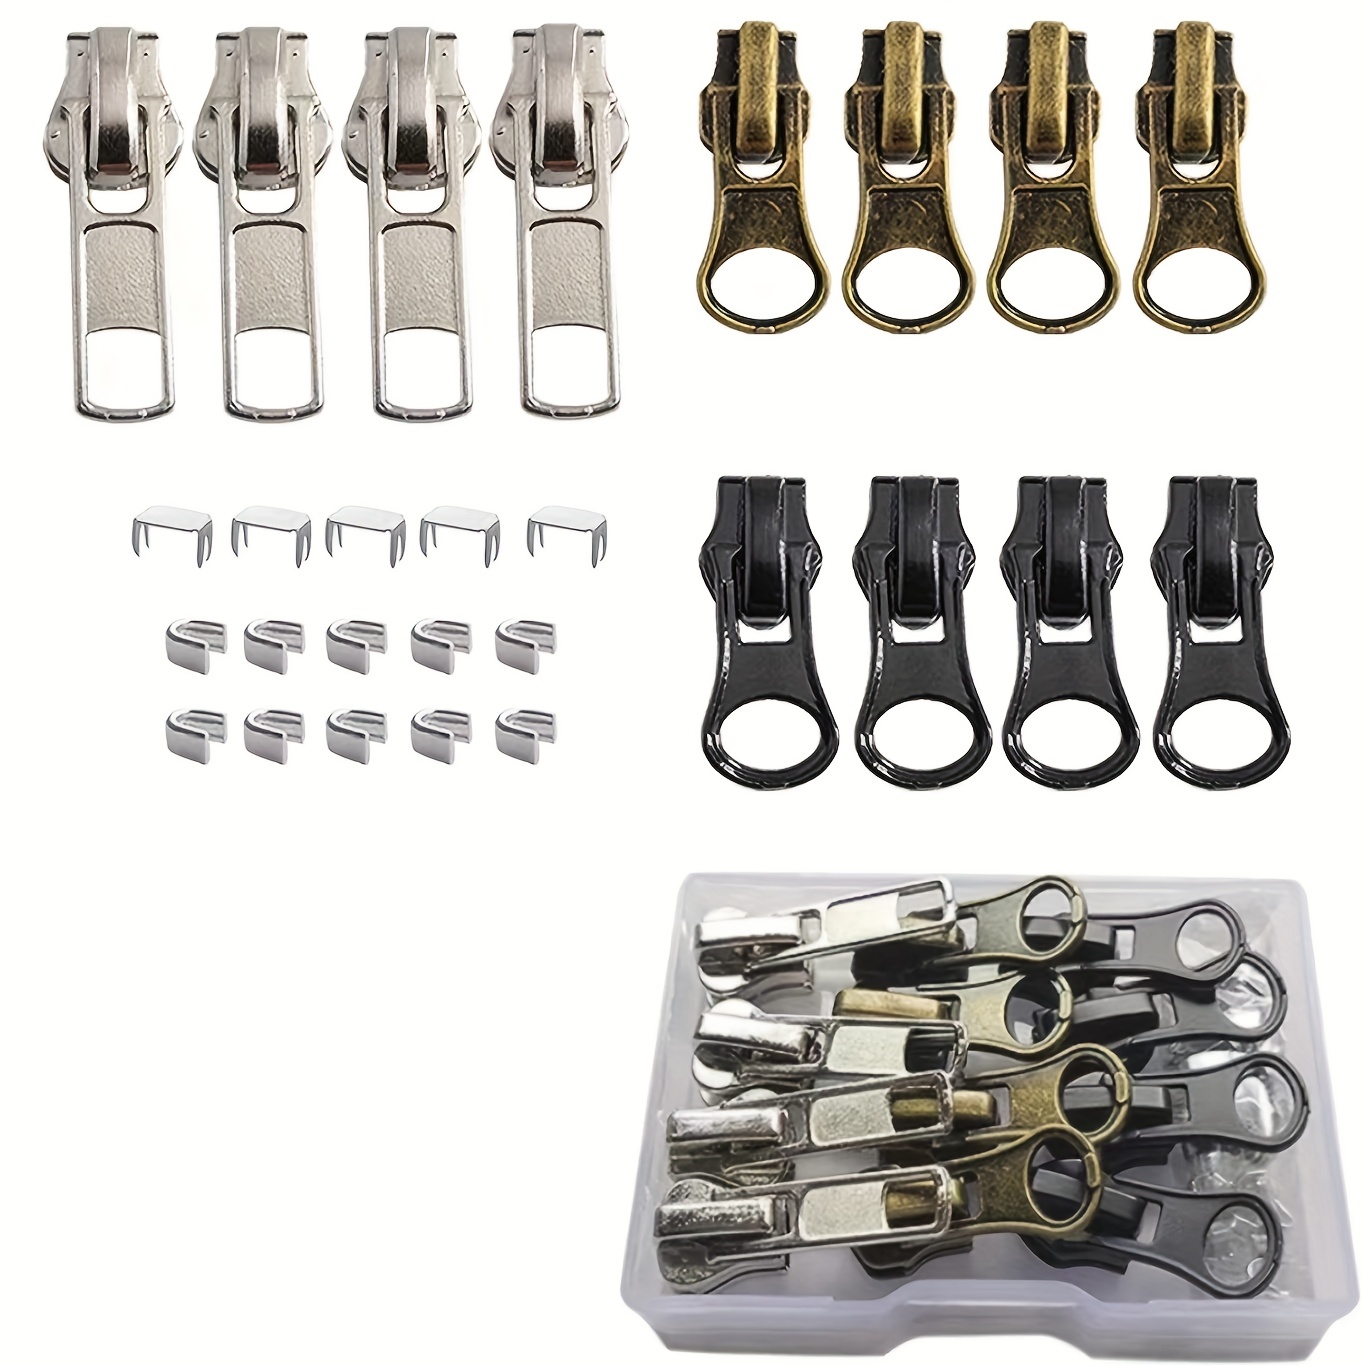 12 Pieces Zipper Slider Repair Kits Black Bronze And Silver Zipper Sliders  Zipper Pull Replacement For Metal Plastic And Nylon Coil Jacket Zippers